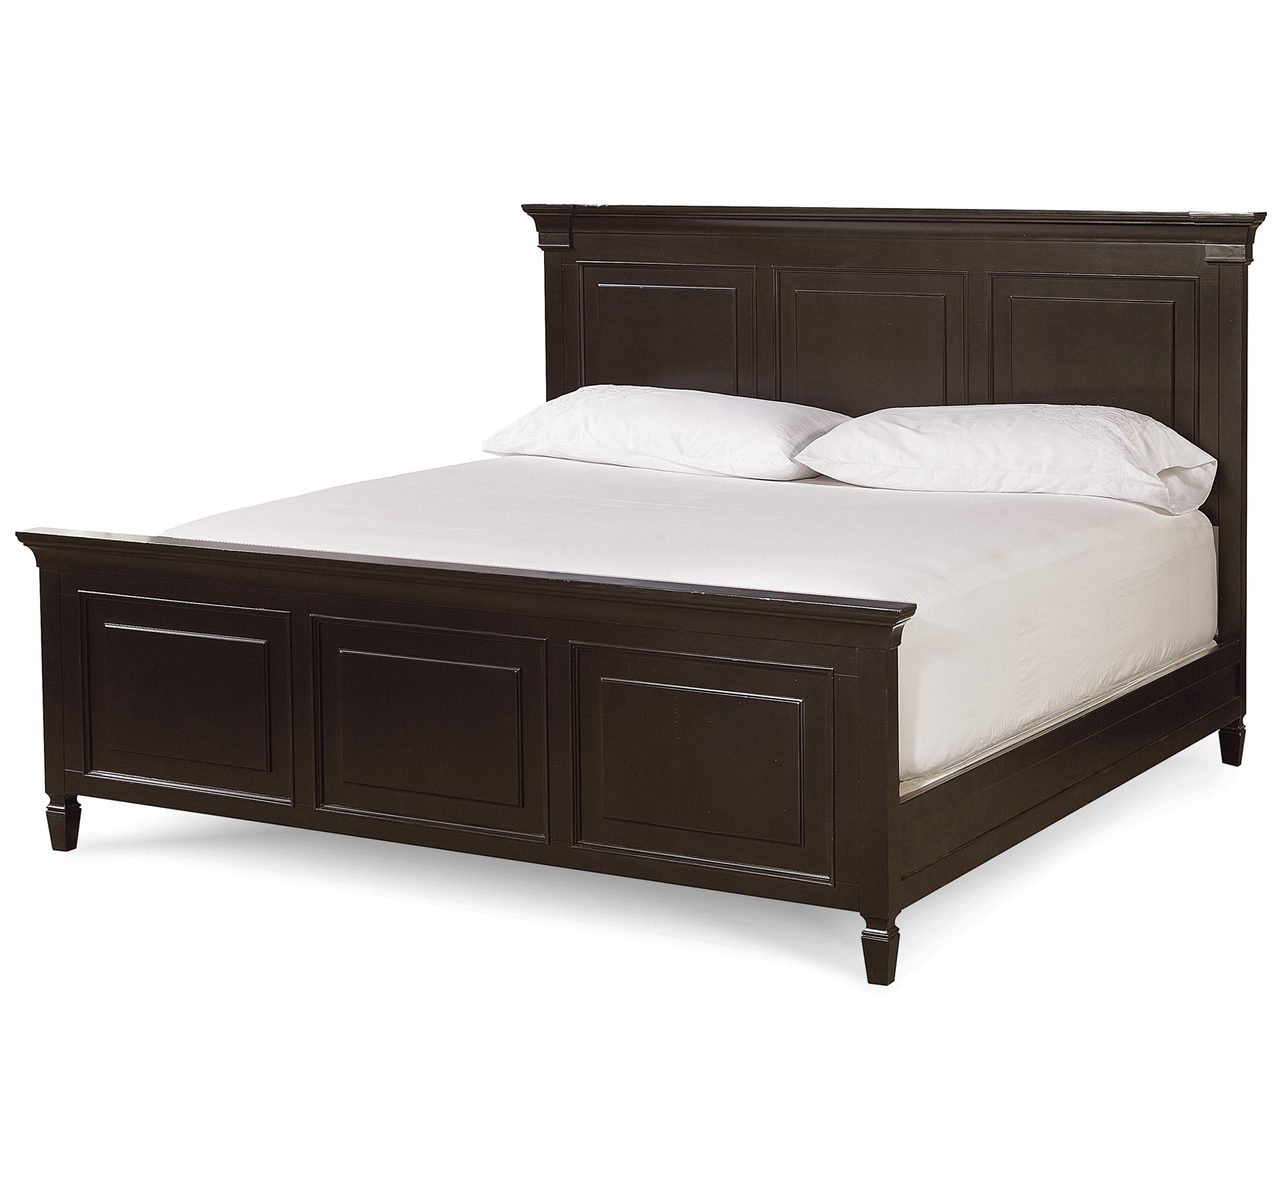 Country-Chic Black Queen Size Panel Bed Frame | Zin Home